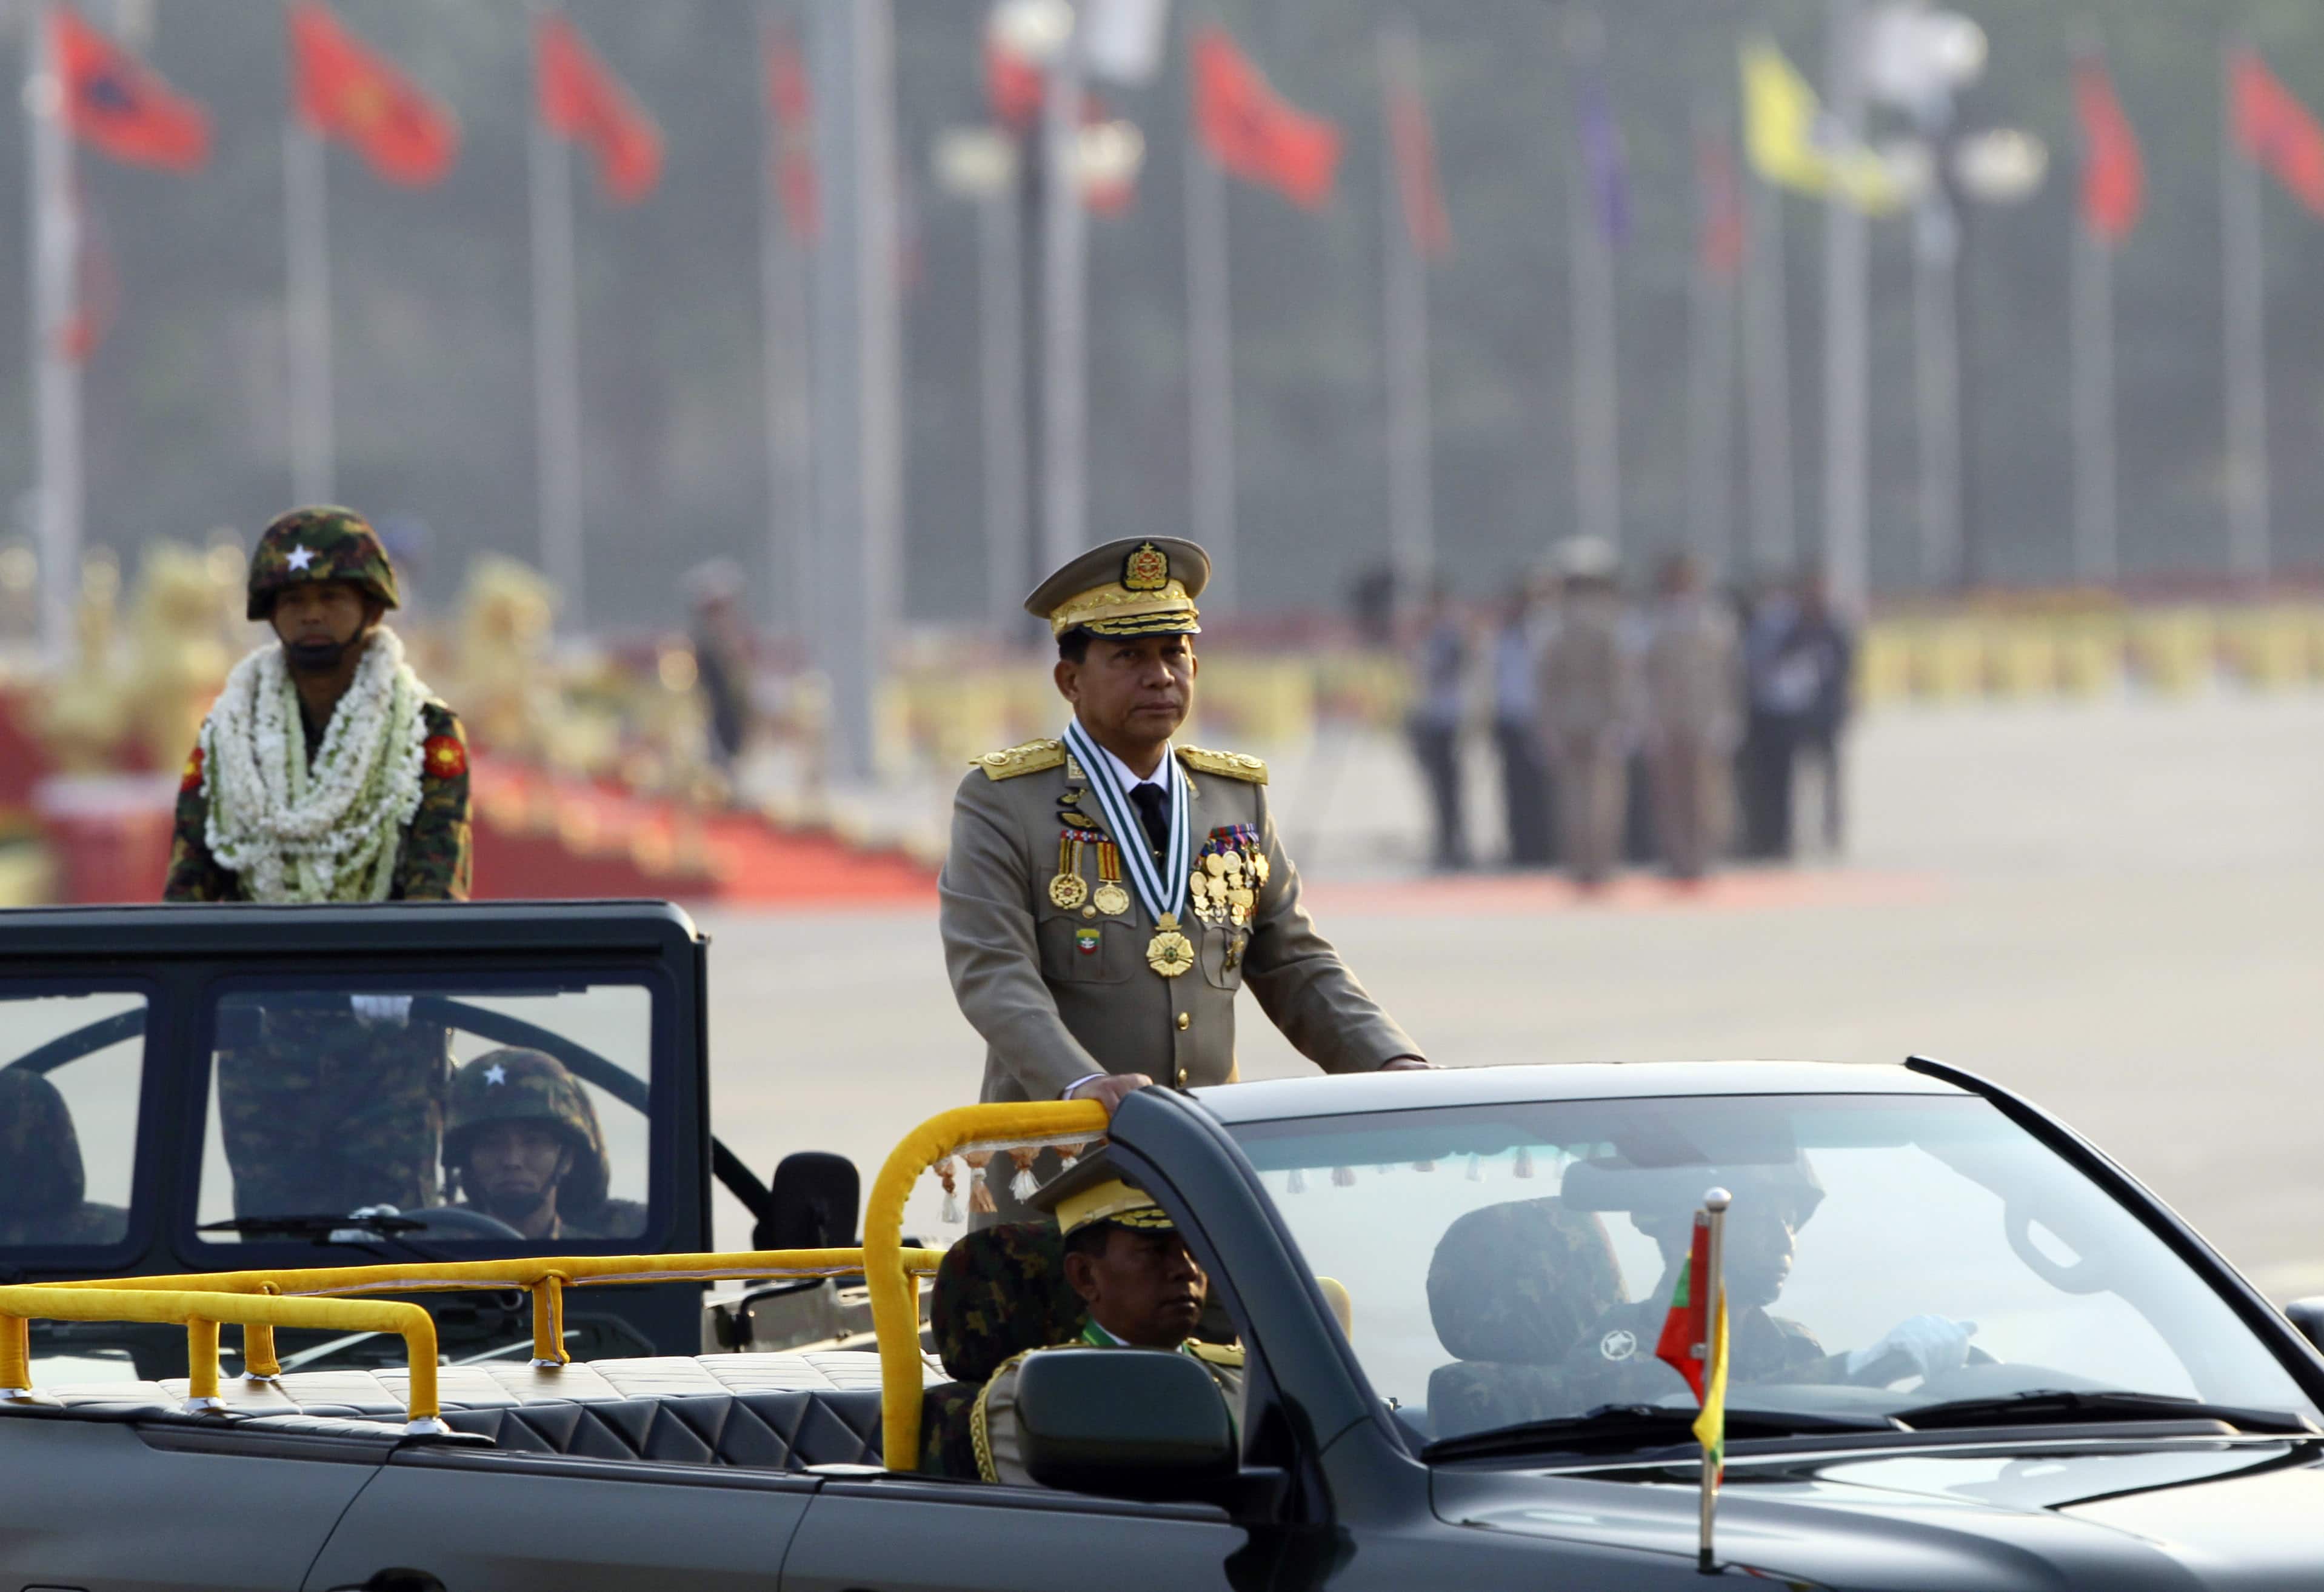 Burma's commander-in-chief, Gen. Min Aung Hlaing inspects officers during a parade to commemorate the 72nd Armed Forces Day in Naypyitaw, 27 March 2017, AP Photo/Aung Shine Oo